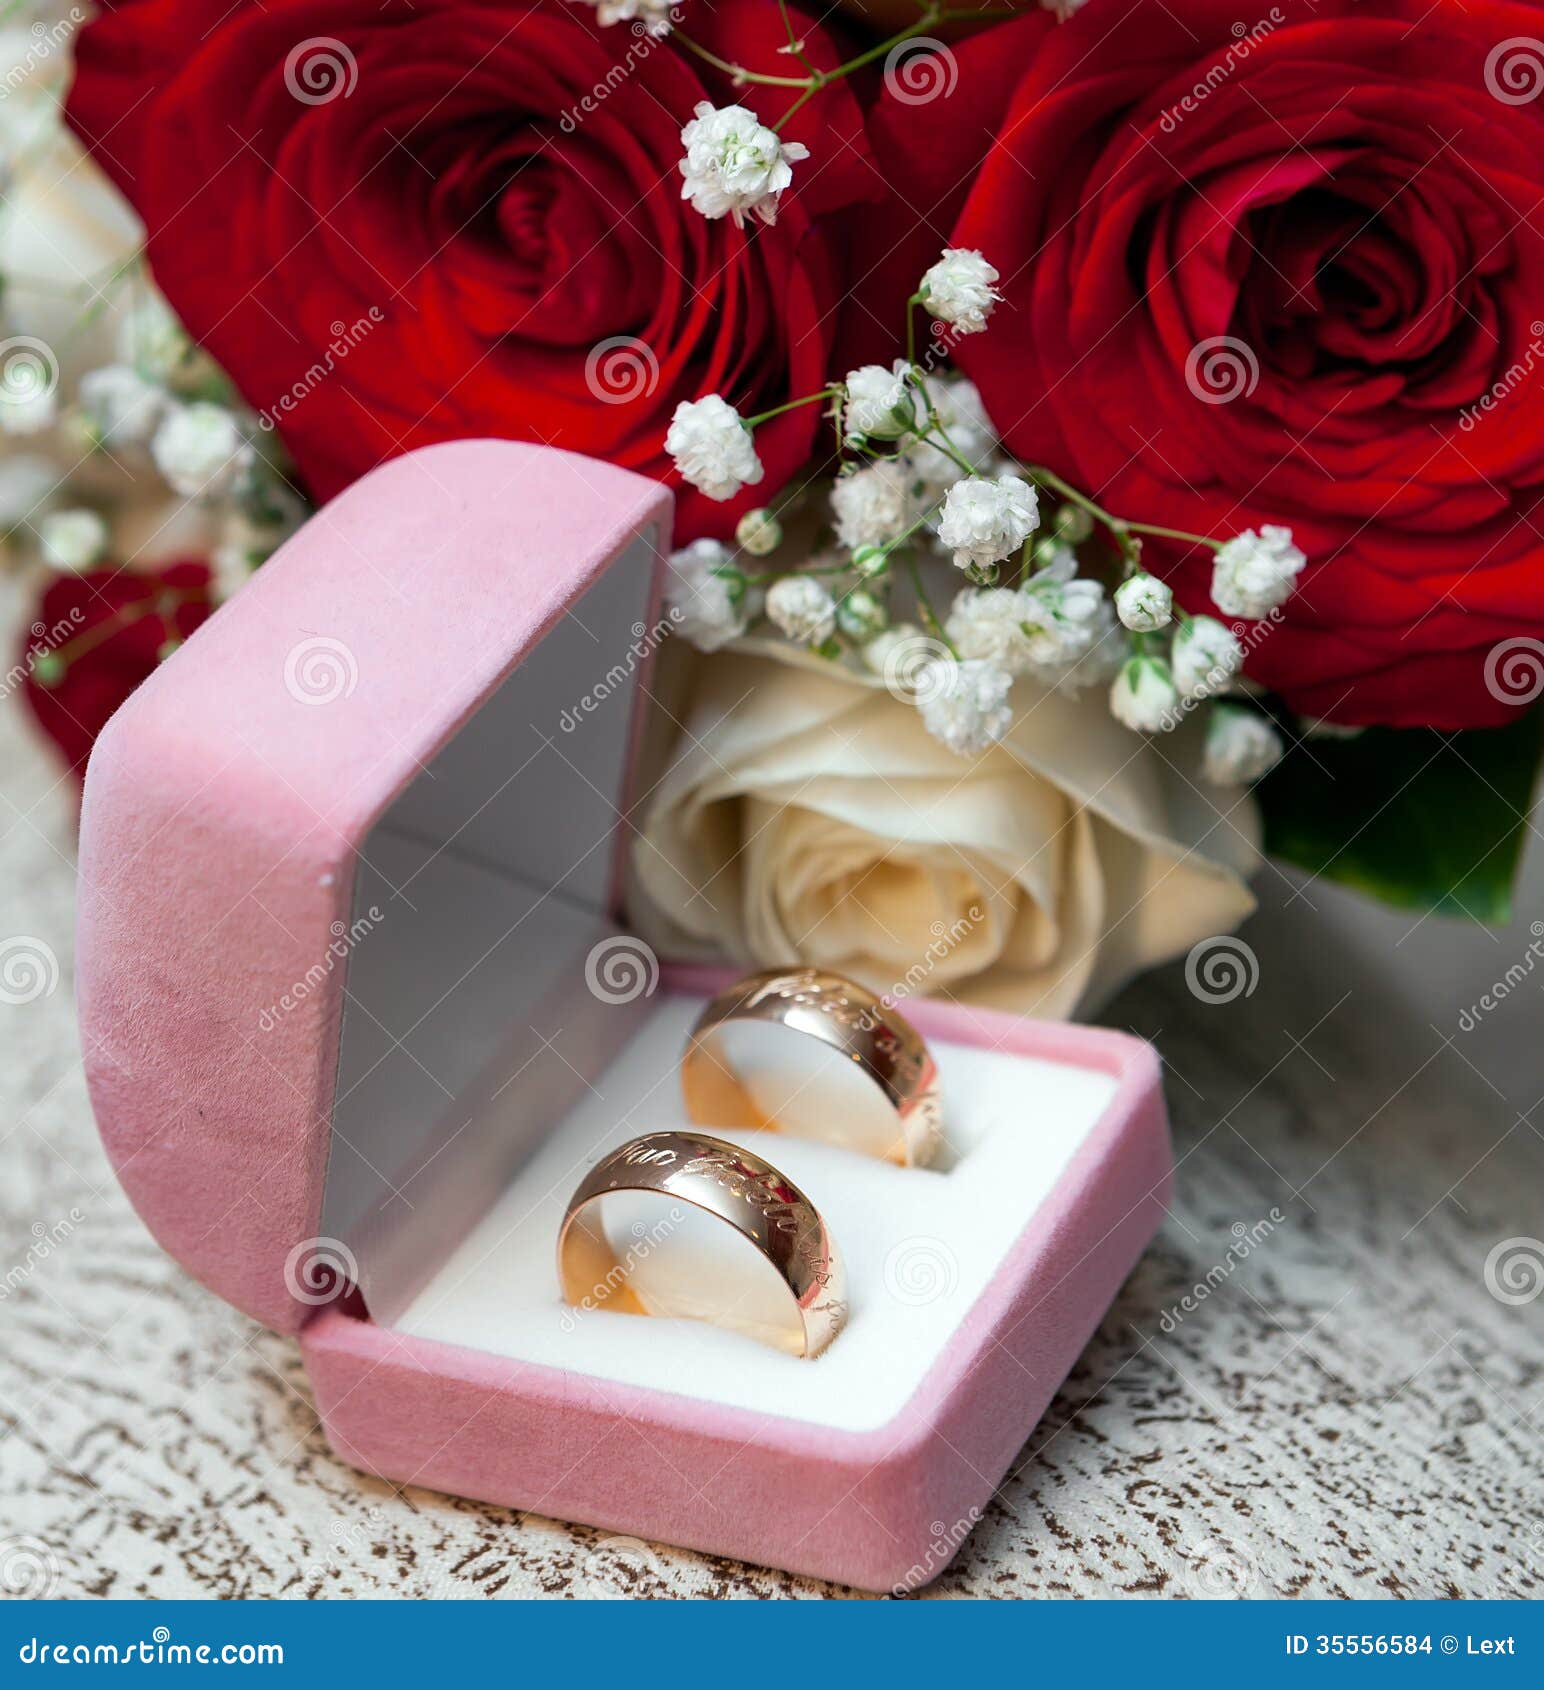 Wedding Rings, Gift Box and Flowers Stock Photo - Image of jewelry ...